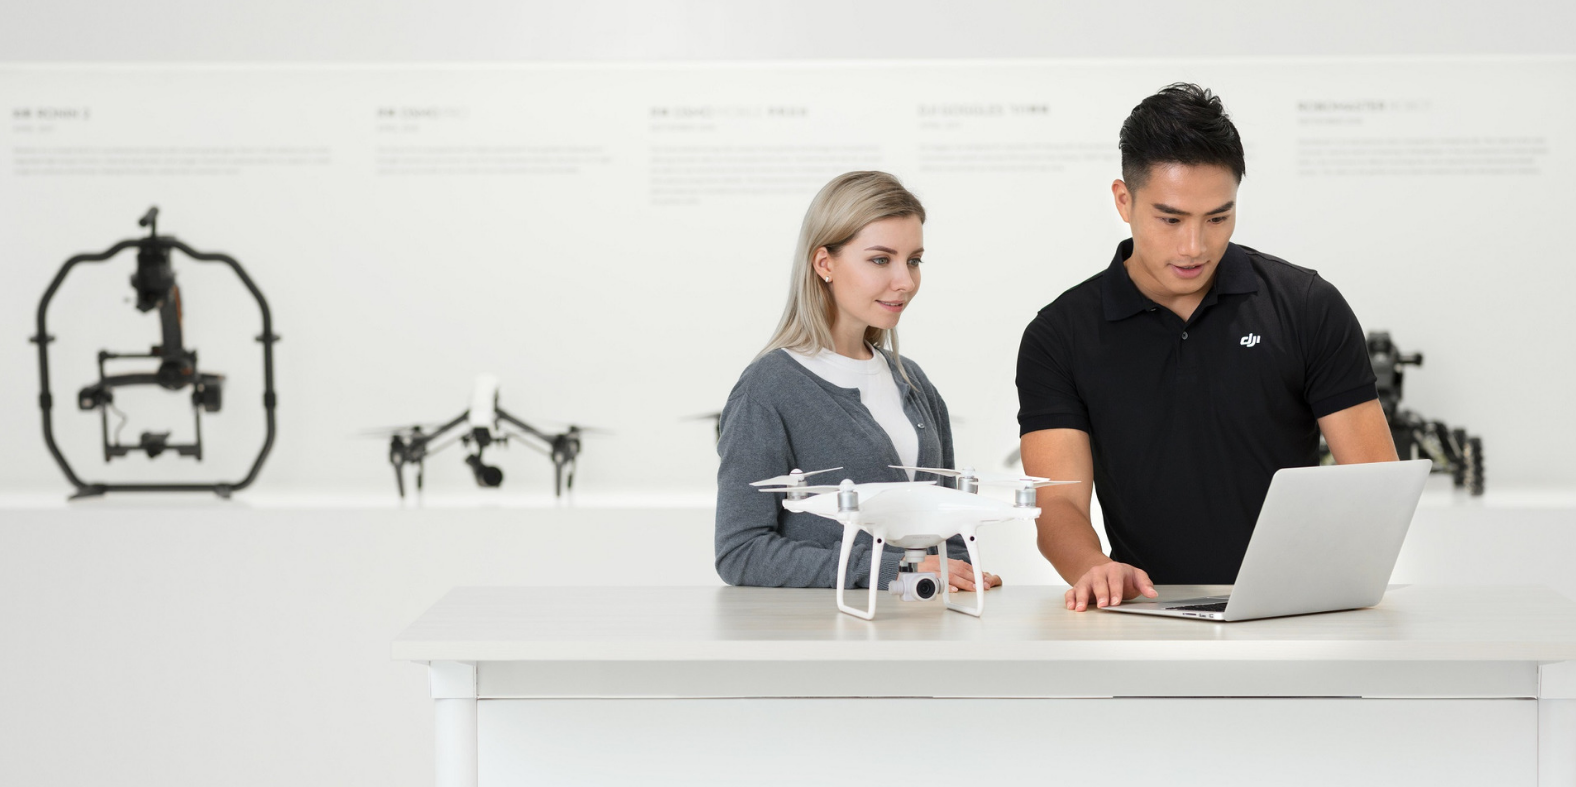 Guide to Choosing the Right Drone Training Course for You